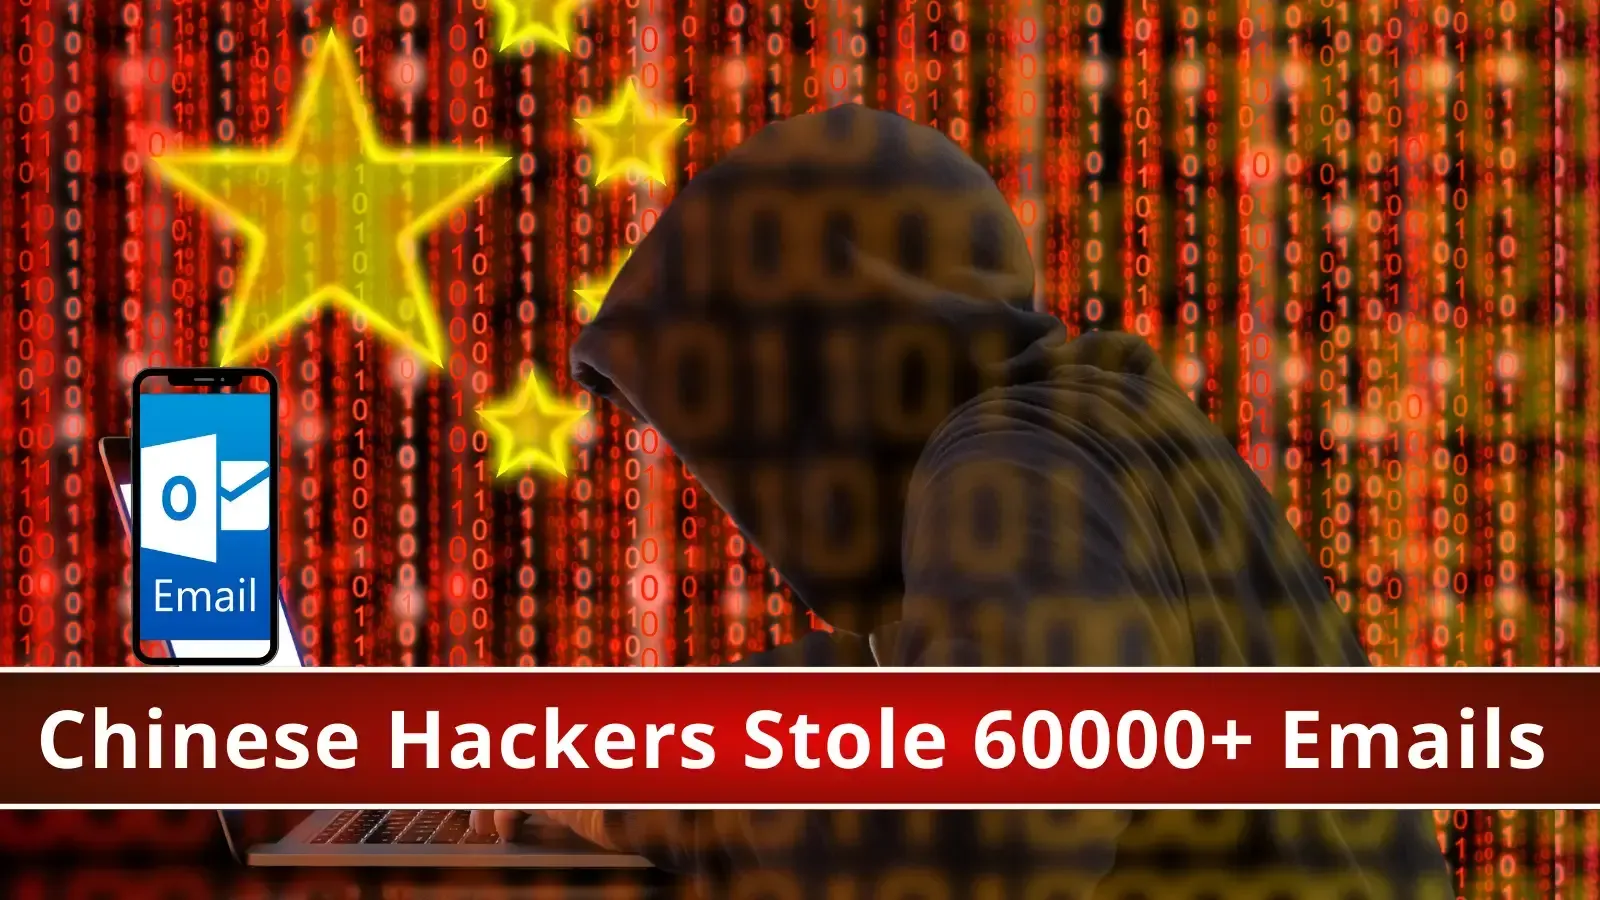 Chinese Hackers breached Microsoft’s Email Platform to steal 60,000+ US Govt emails